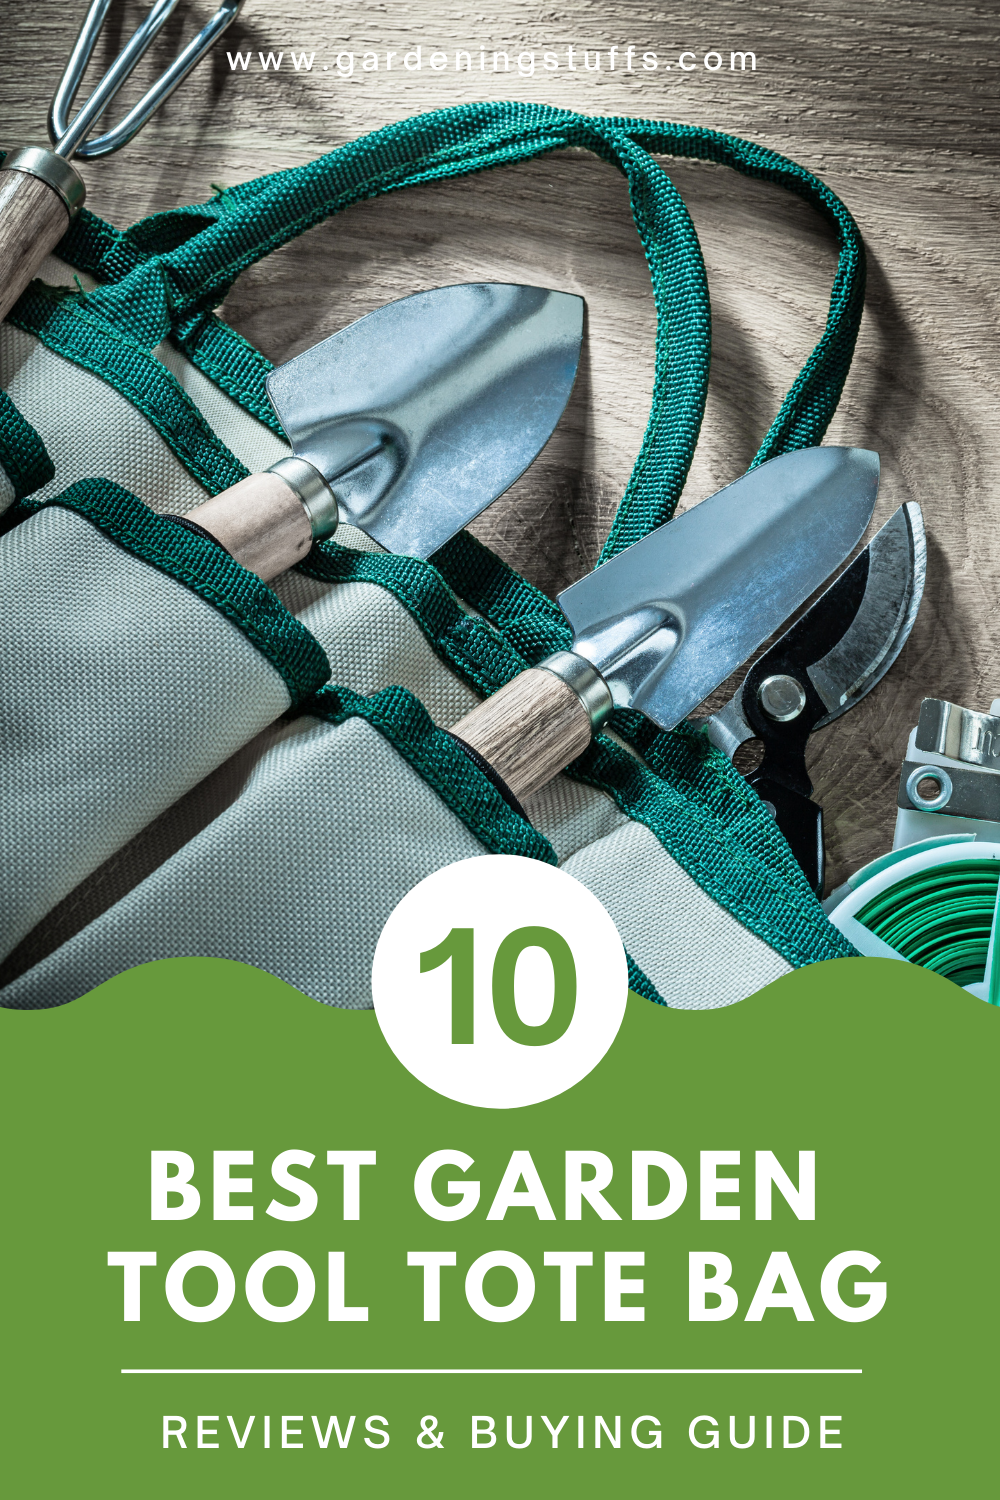 Are you planning to purchase a garden tote bag that could hold all your gardening gear together so that you do not have to run up and down for each gear? Check out this article, we would help you purchase the best garden tool tote bag available on the market today.